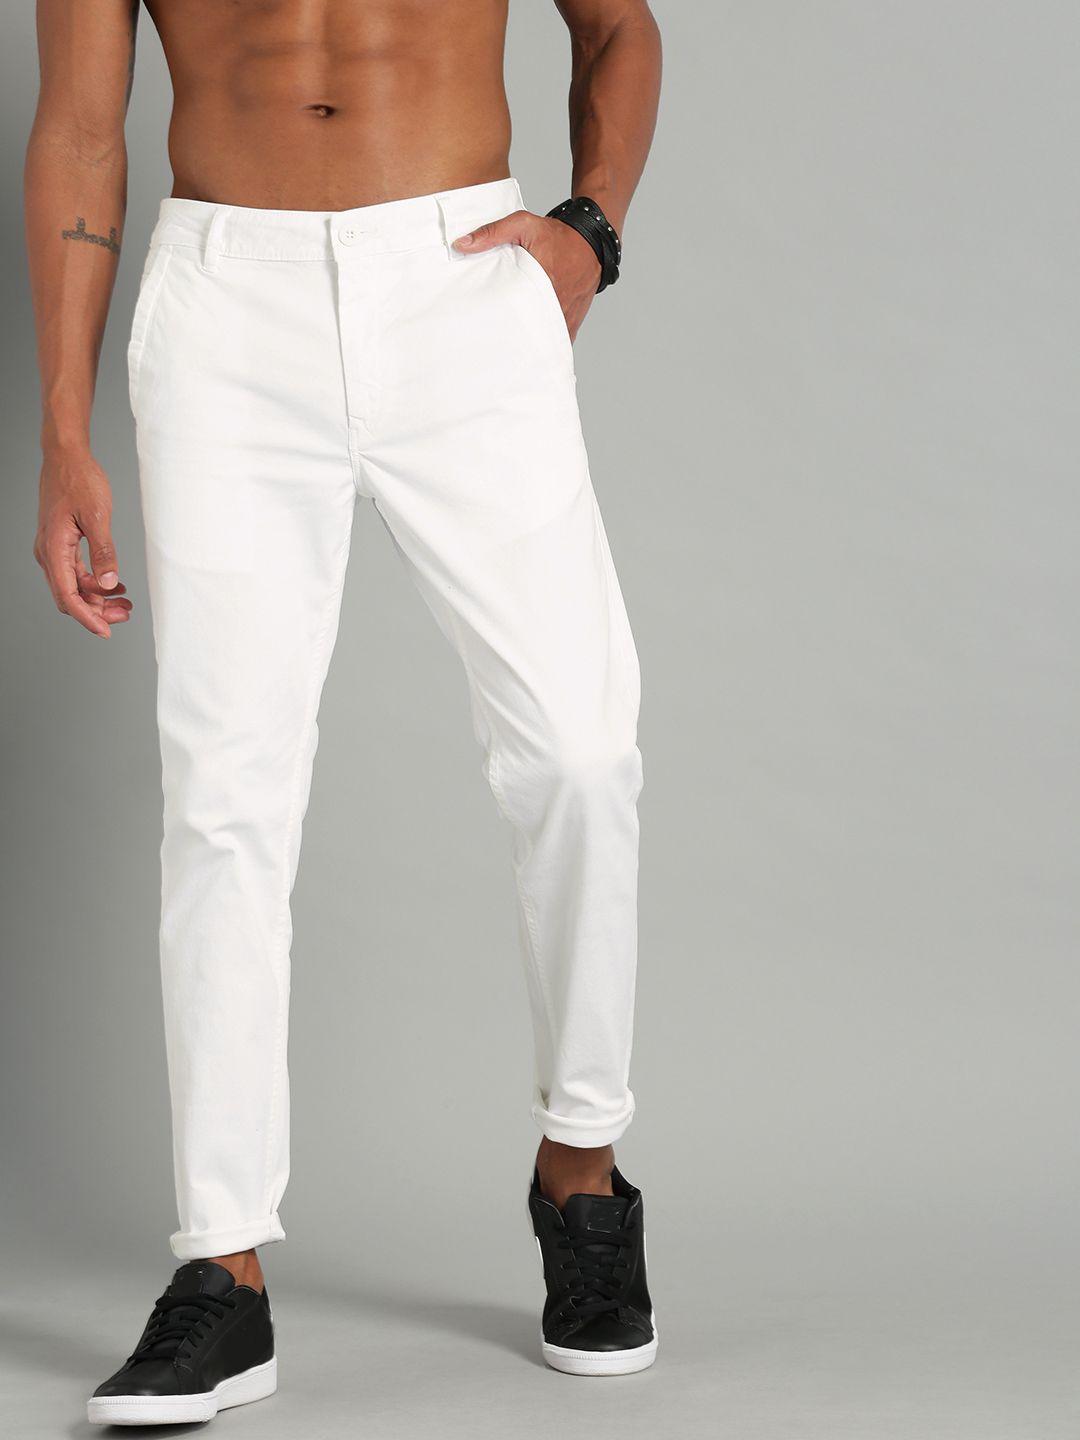 the-roadster-lifestyle-co-men-white-solid-chinos